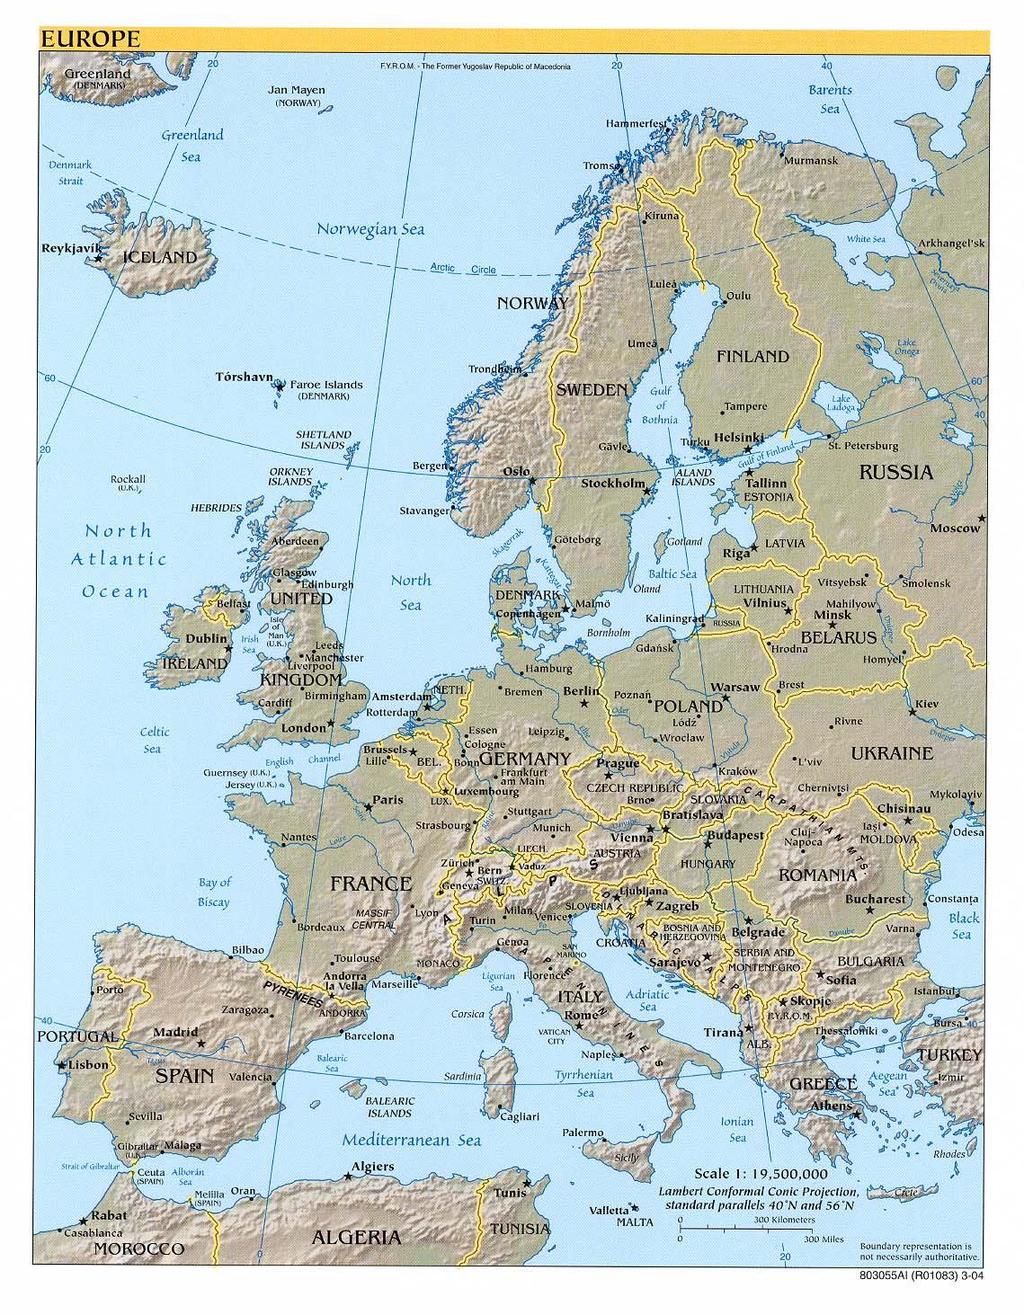 Europe and Manufacturing The Western European industrial region appears as one region on a world map.